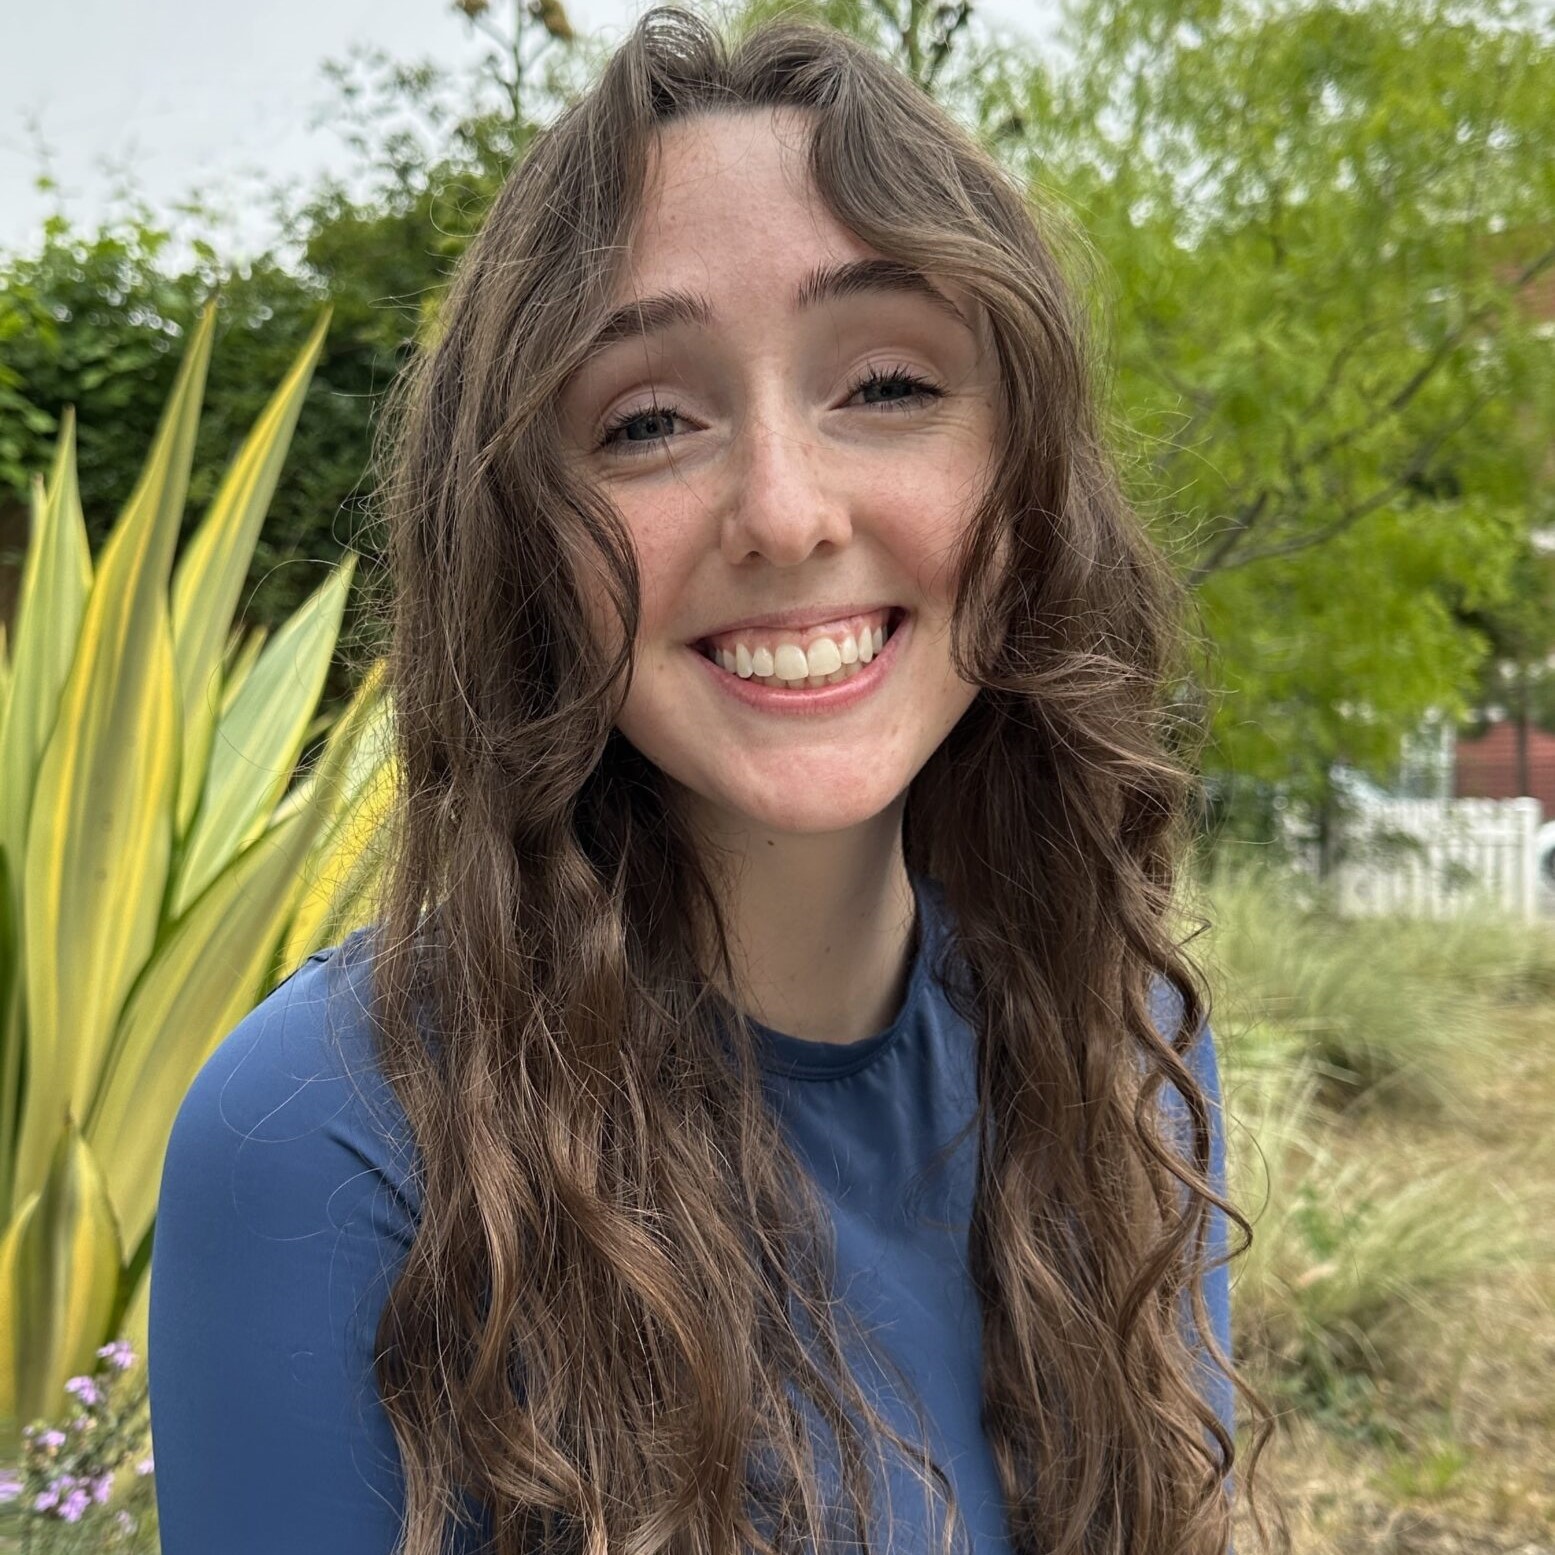 Headshot of Research Assistant Isabelle Magee wearing a blue shirt and standing in front of a green foliage